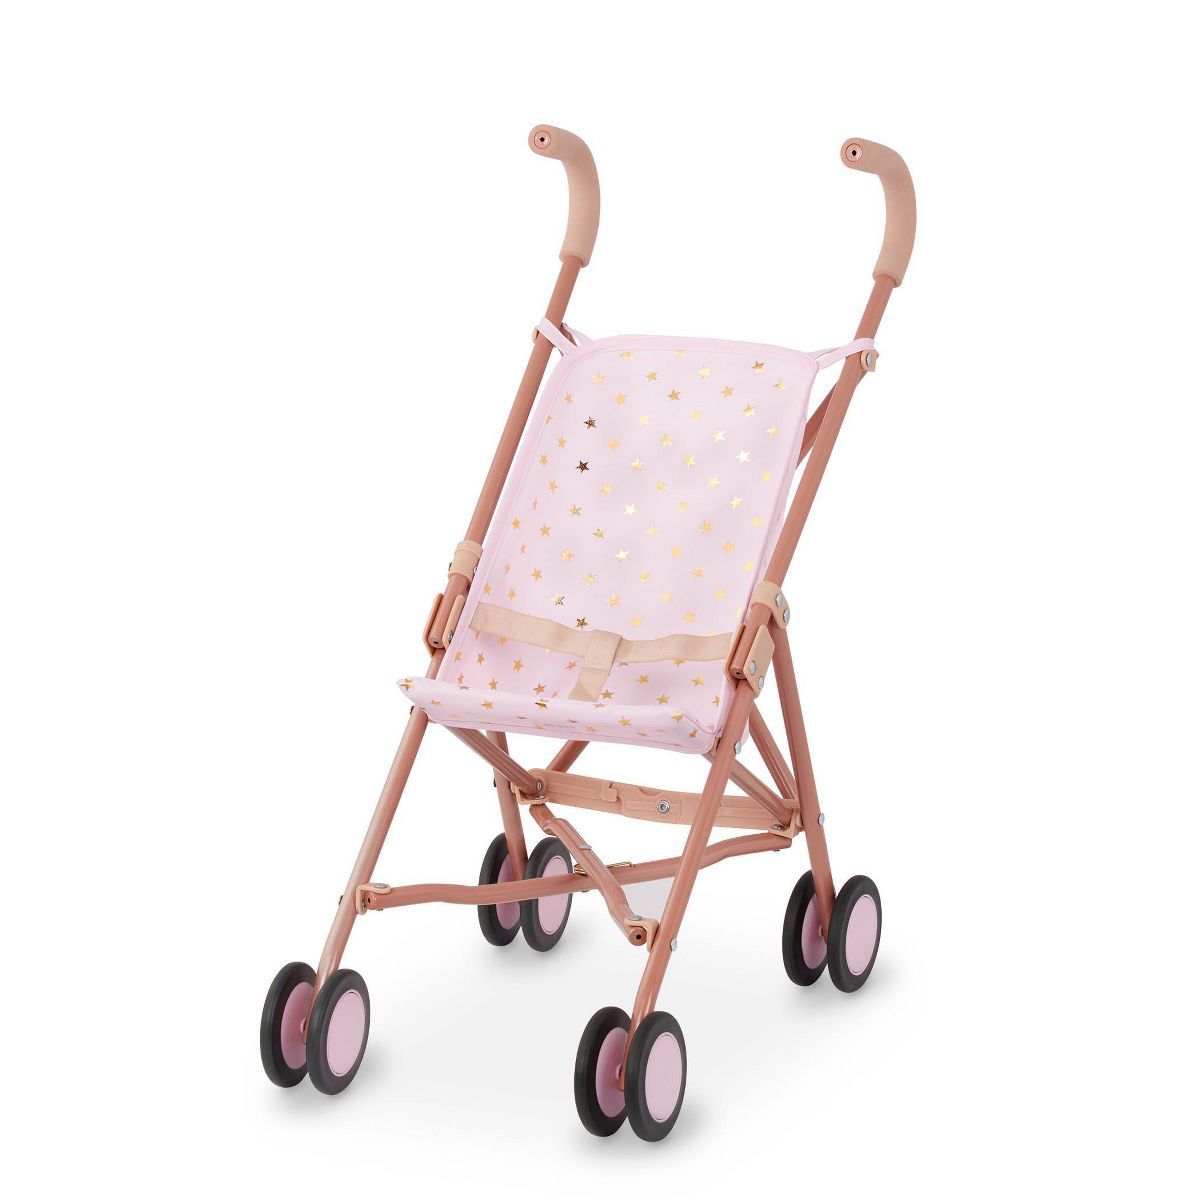 LullaBaby Doll Stroller Fold-Up Accessory - Gold Star Print | Target